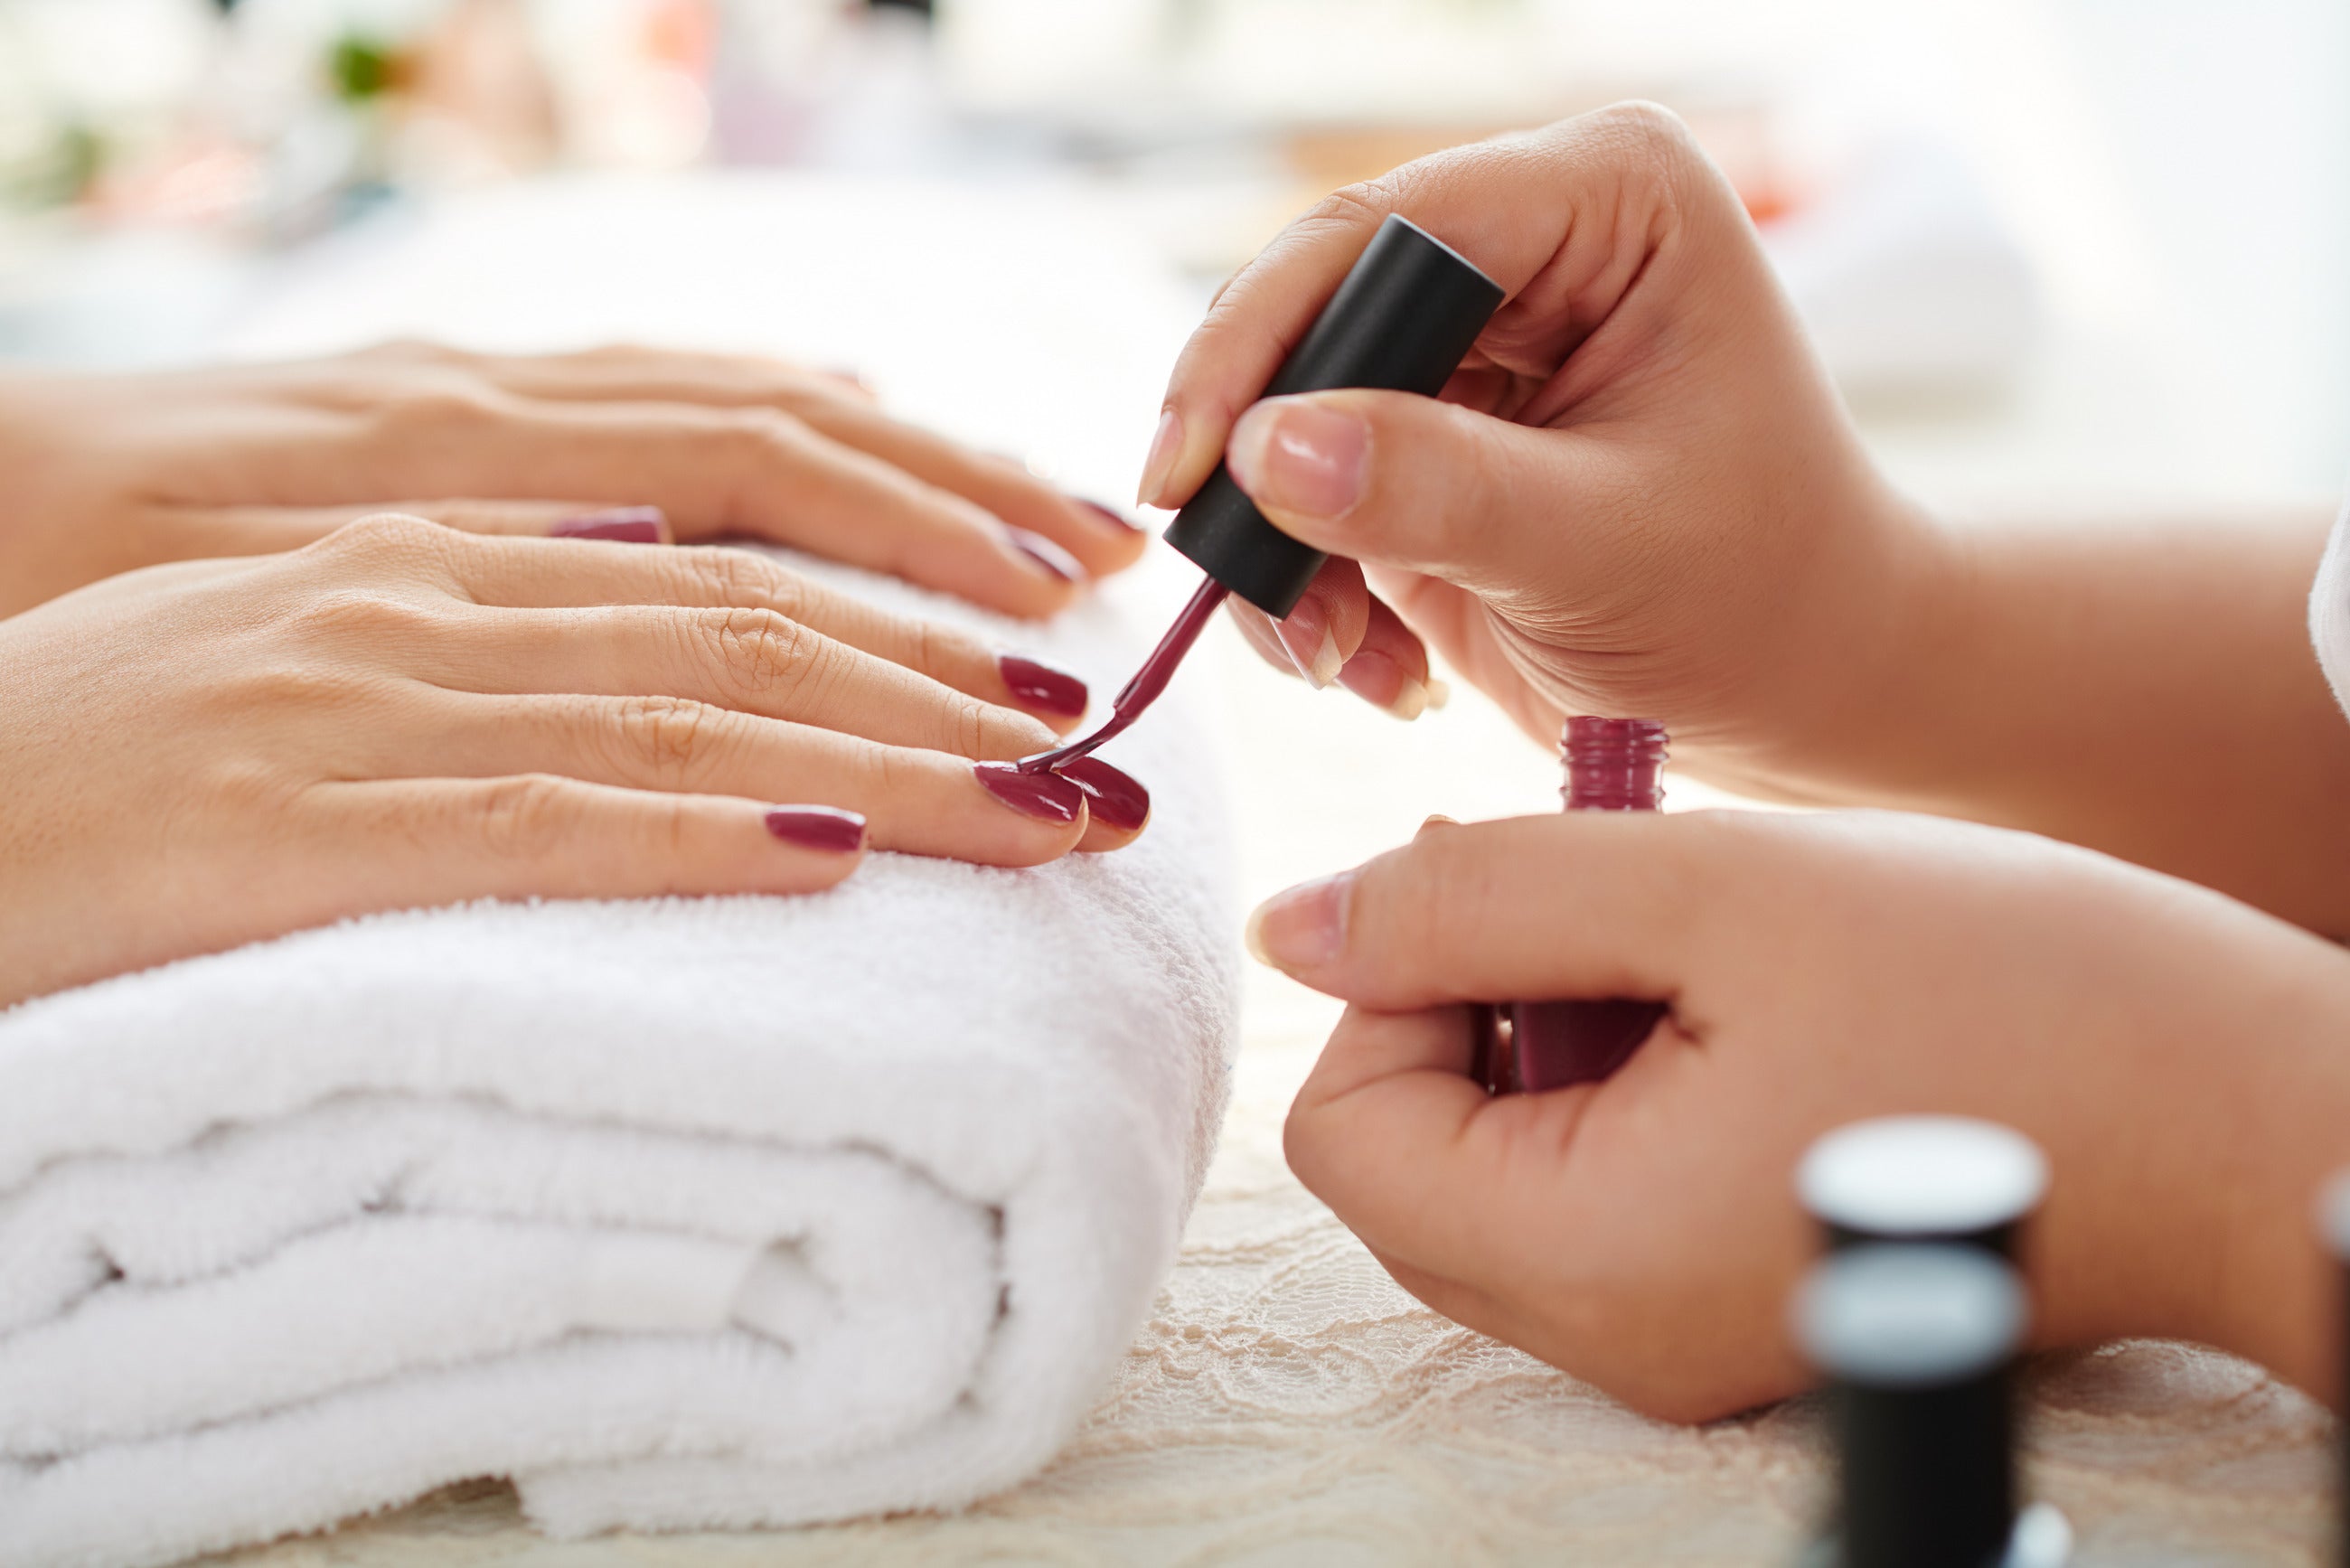 Gel nail polish being applied to a nail in a salon environment